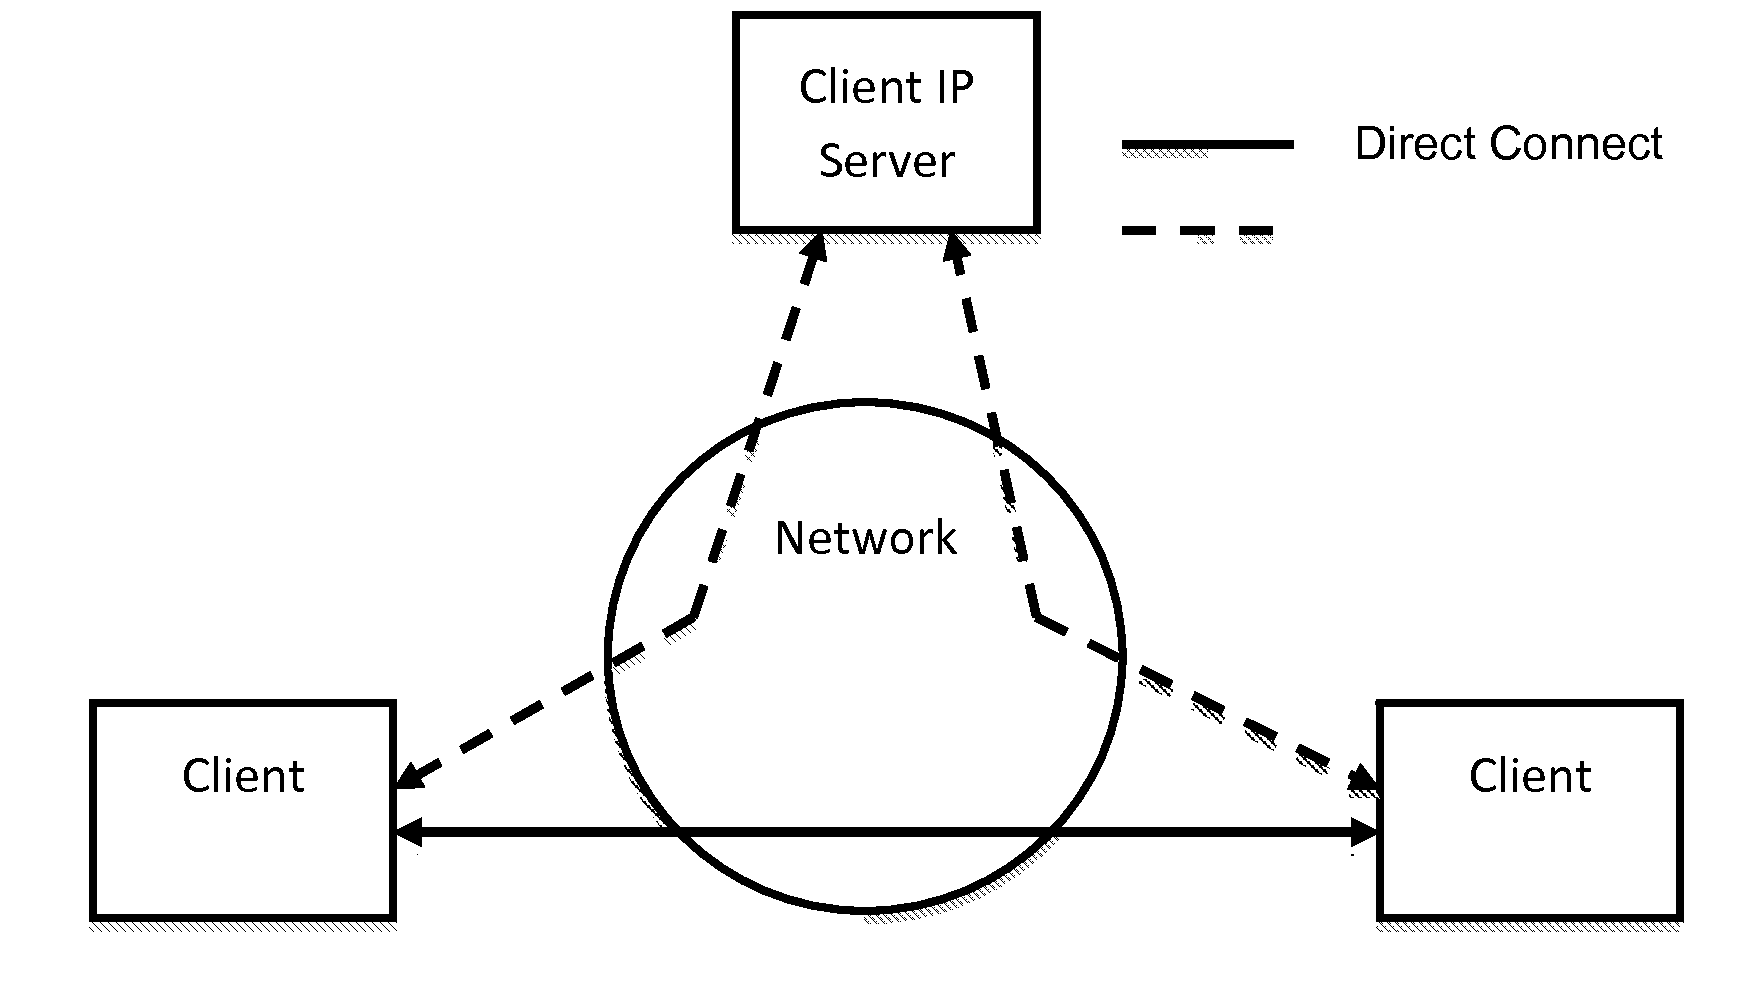 Facilitating network communications with control server, hosting server, and devices utilizing virtual network connections